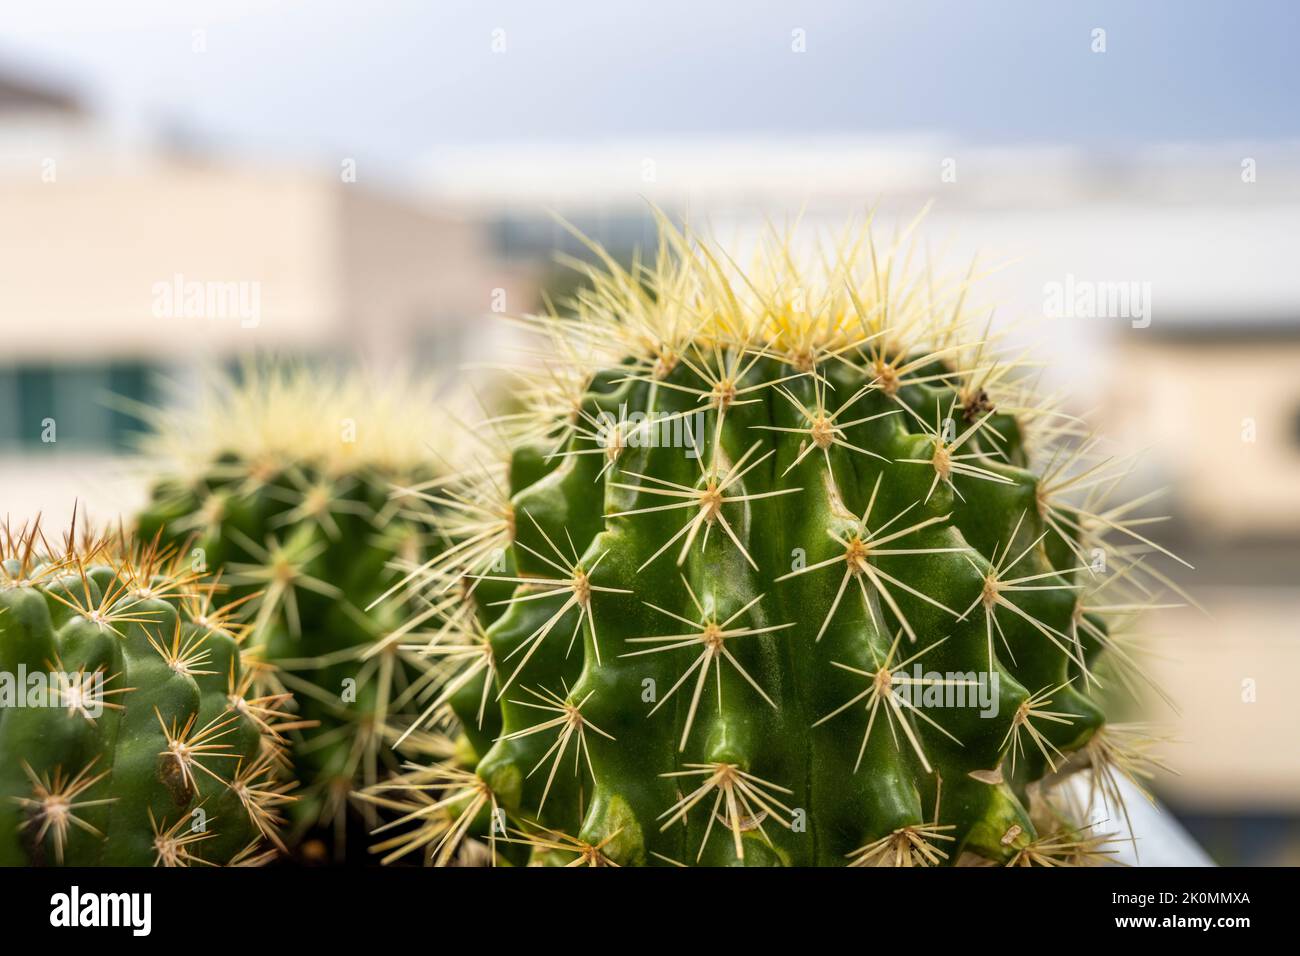 Small barrel cacti huddled together with all their needle-thin spikes on a cloudy day Stock Photo